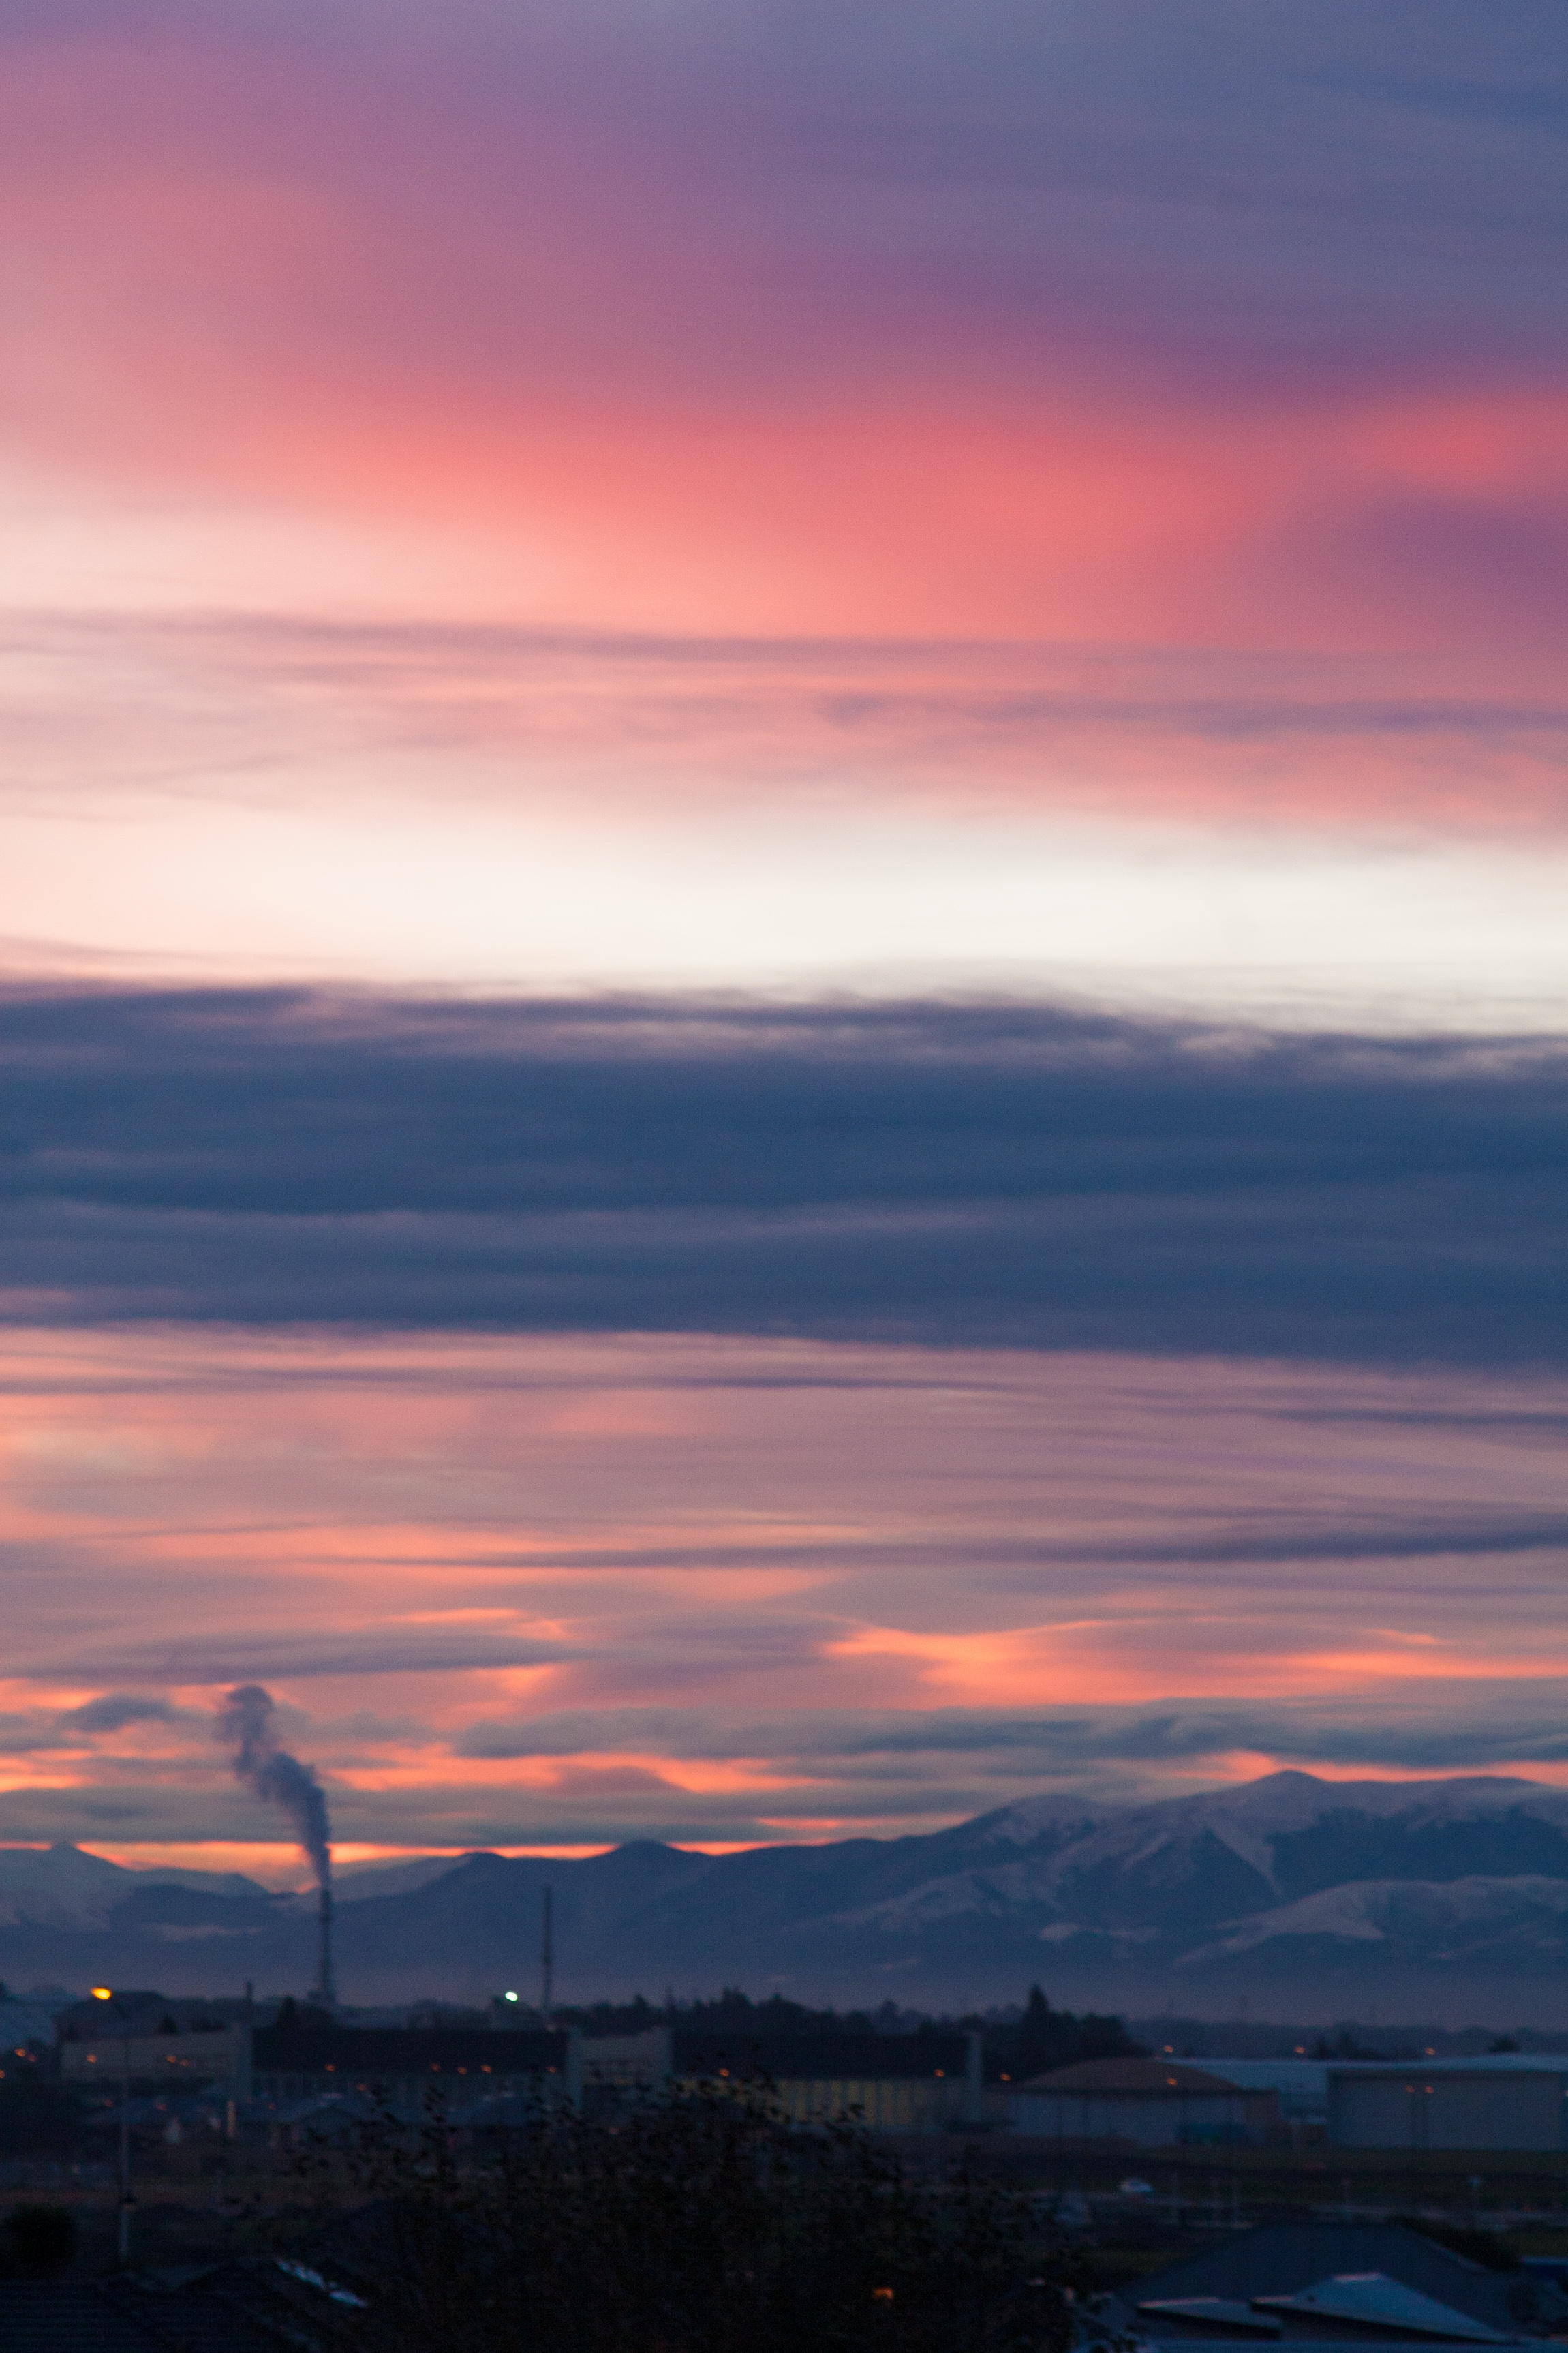 smoke stack against mountains and a pink sunset